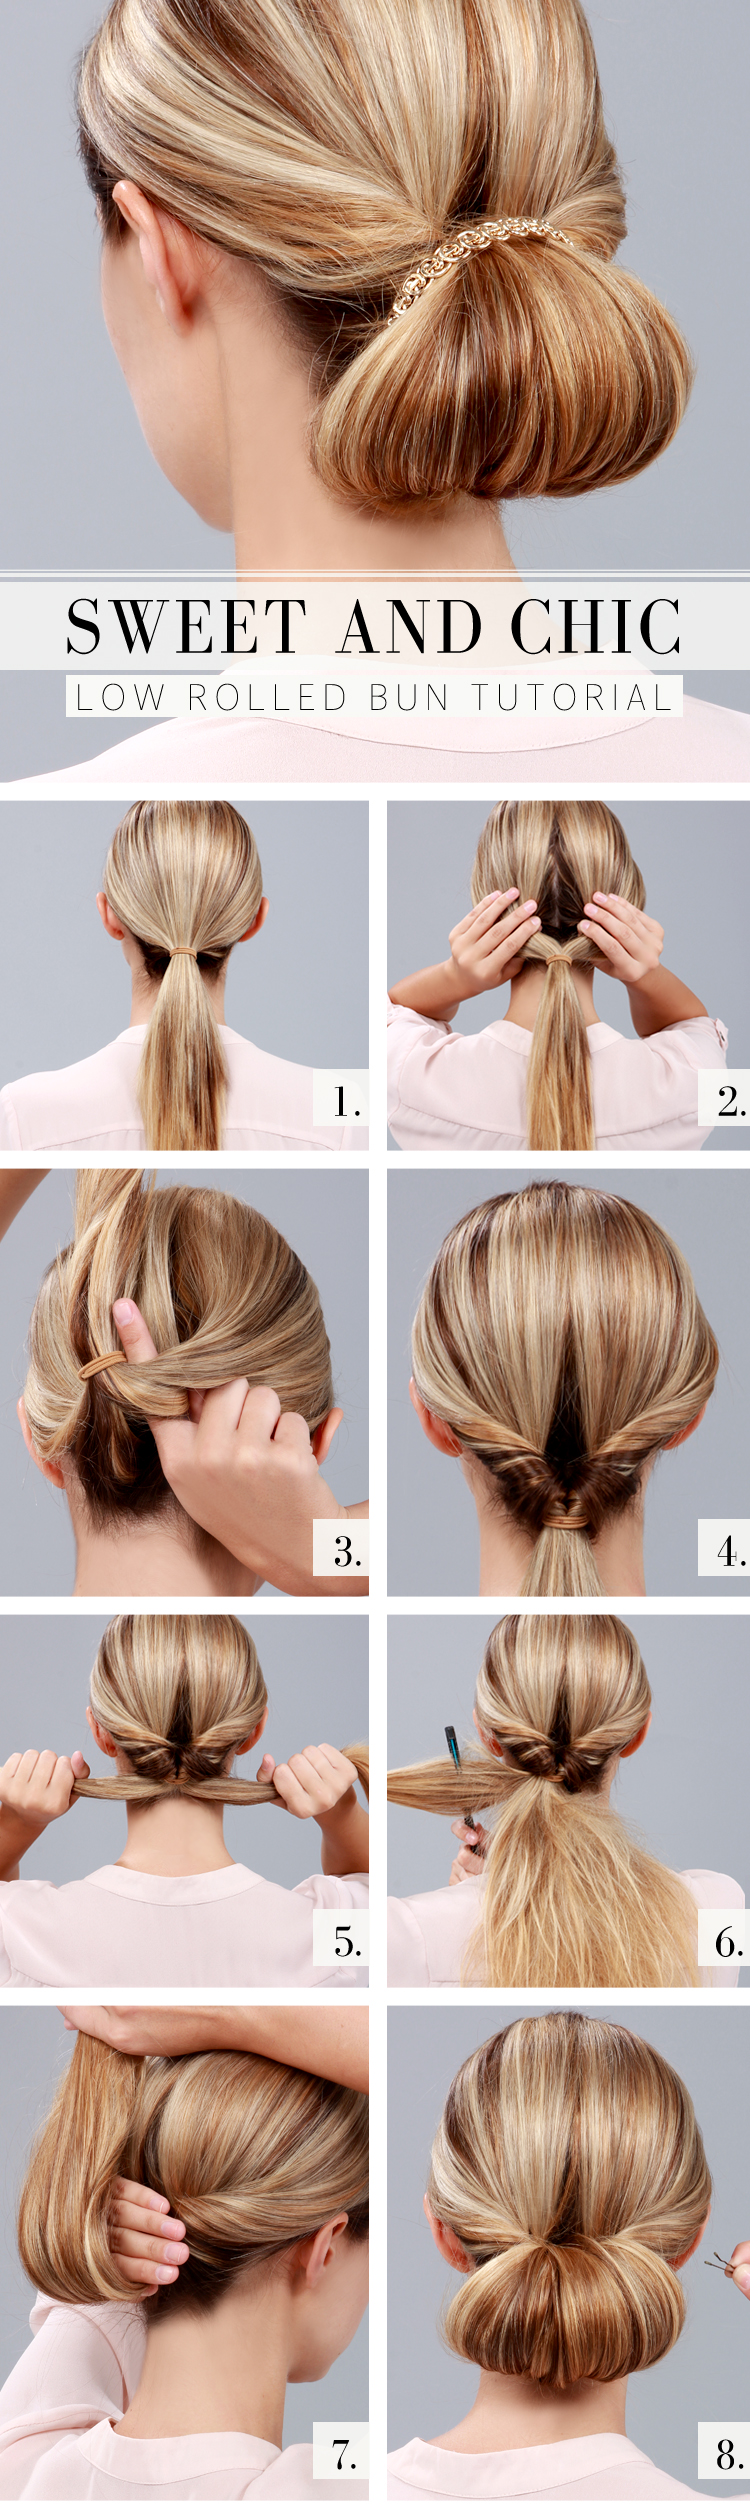 Low Rolled Bun Hairstyle Tutorial